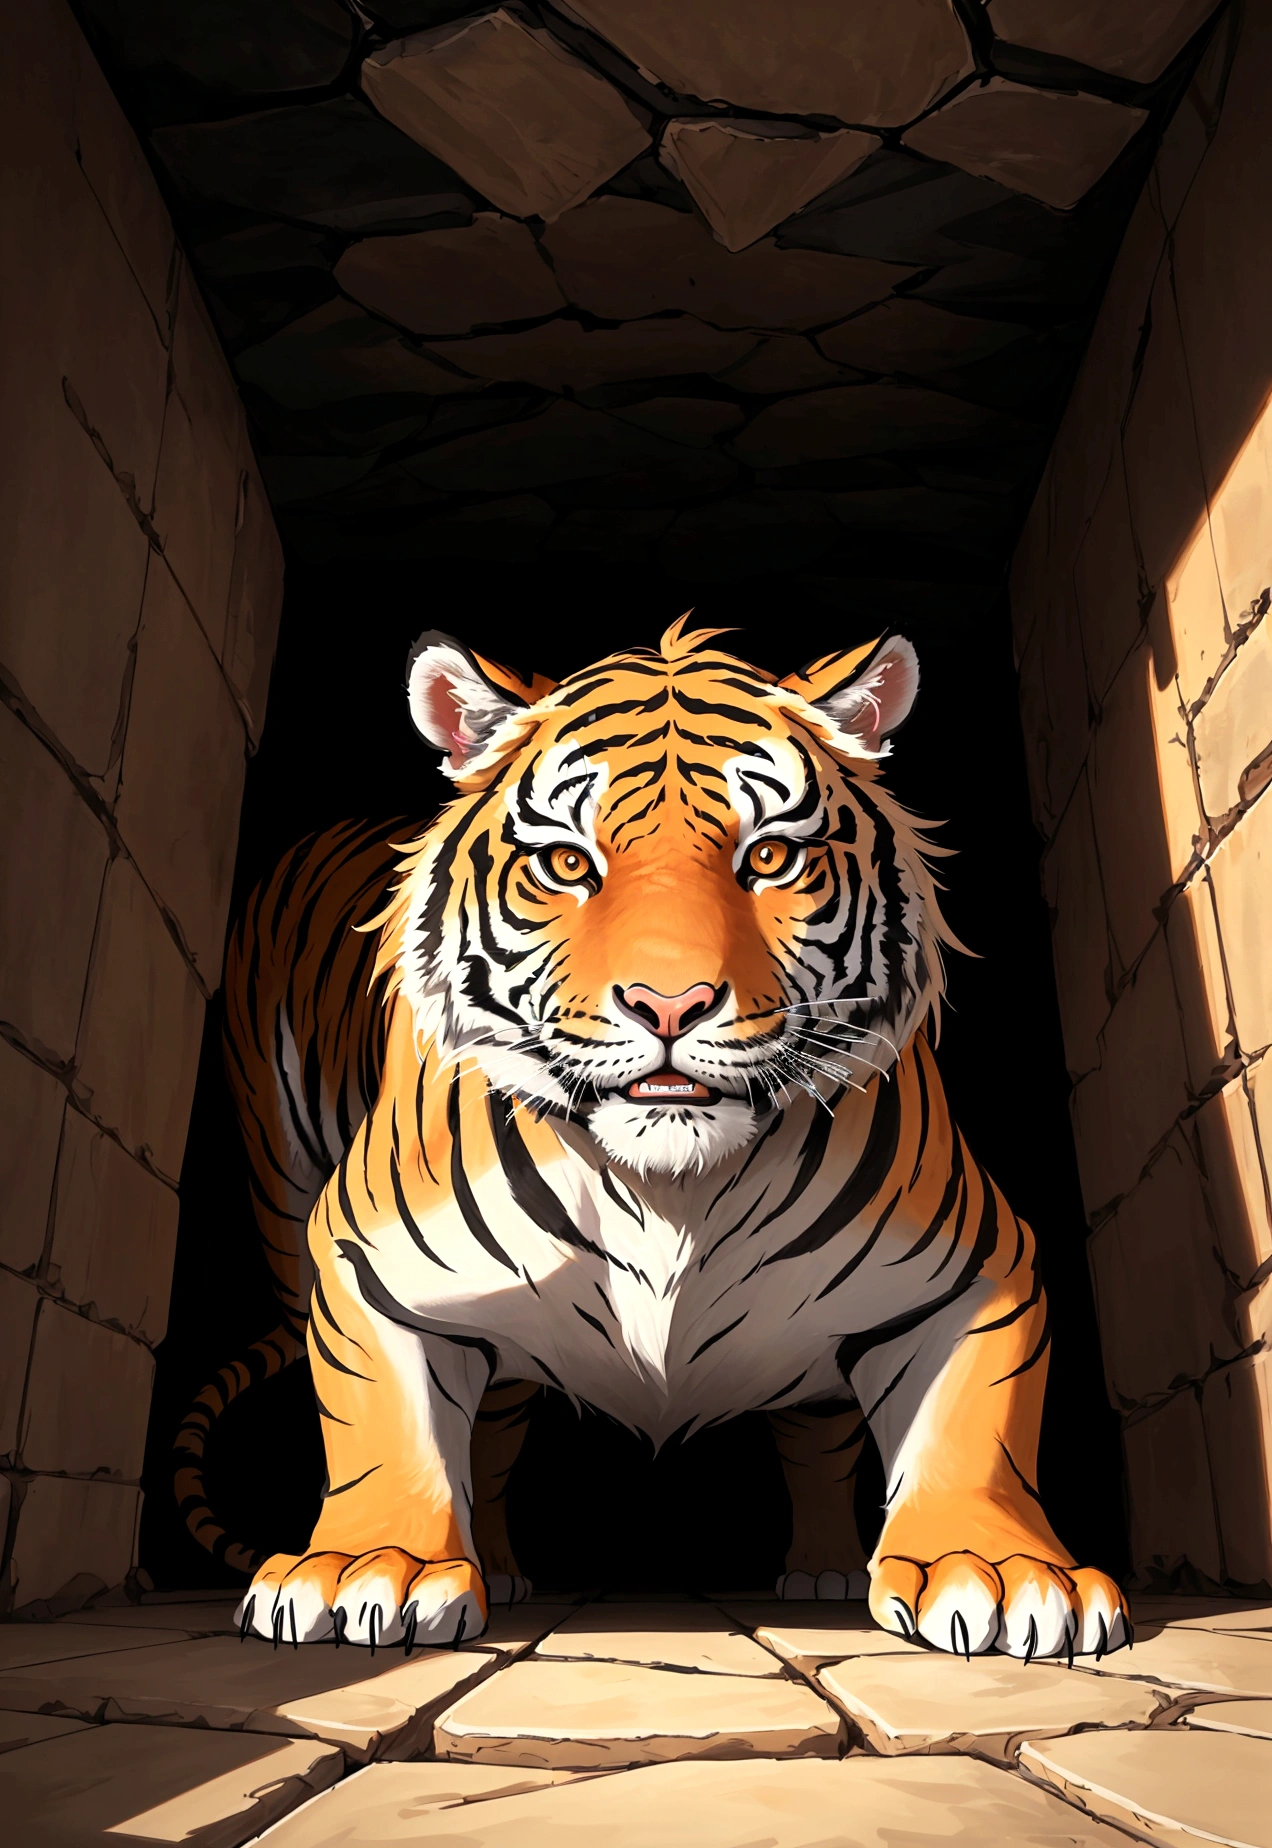 
"Create an image from the perspective of a tiger trapped in a pit, looking up. The viewpoint should be from the bottom of the pit, showing the tiger's gaze upward. Above the pit, there should be a man and a rabbit looking down at the tiger."